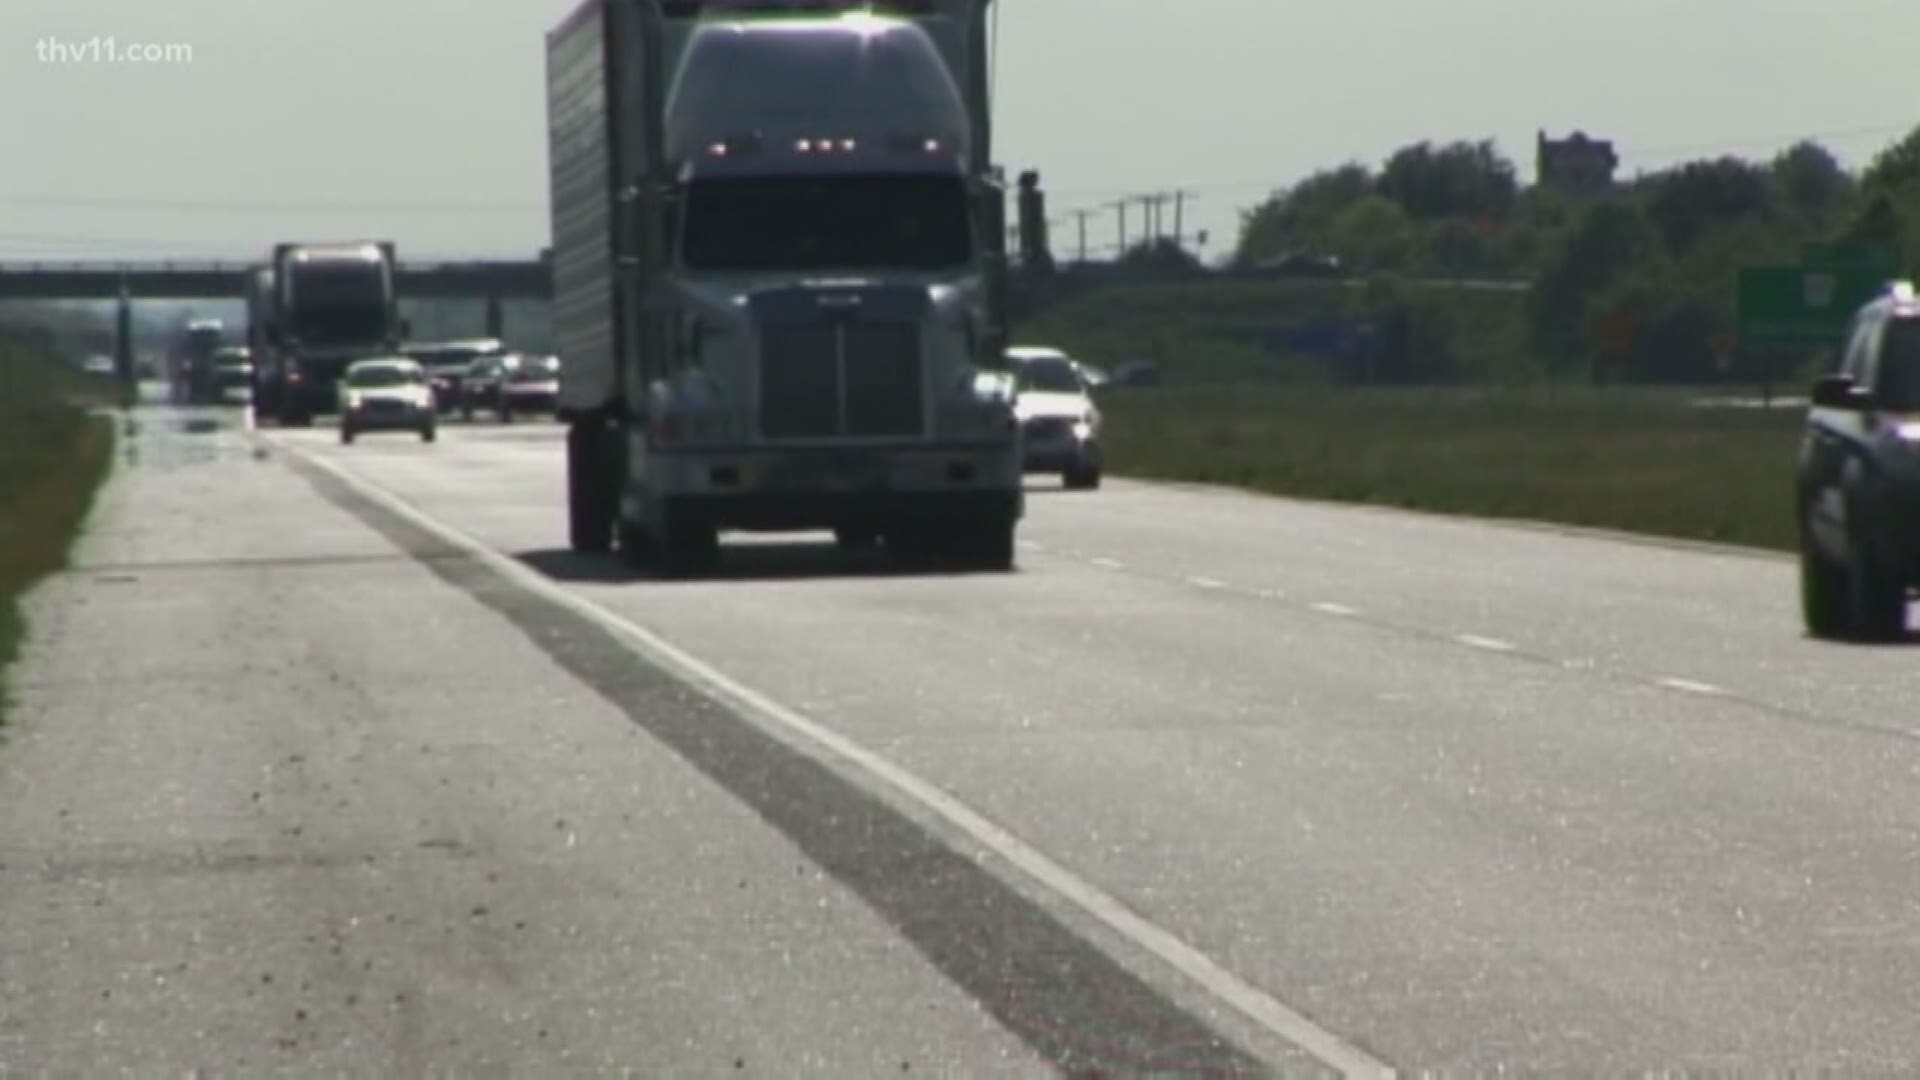 The Arkansas Department of Transportation is joining a national initiative to help stop human trafficking.